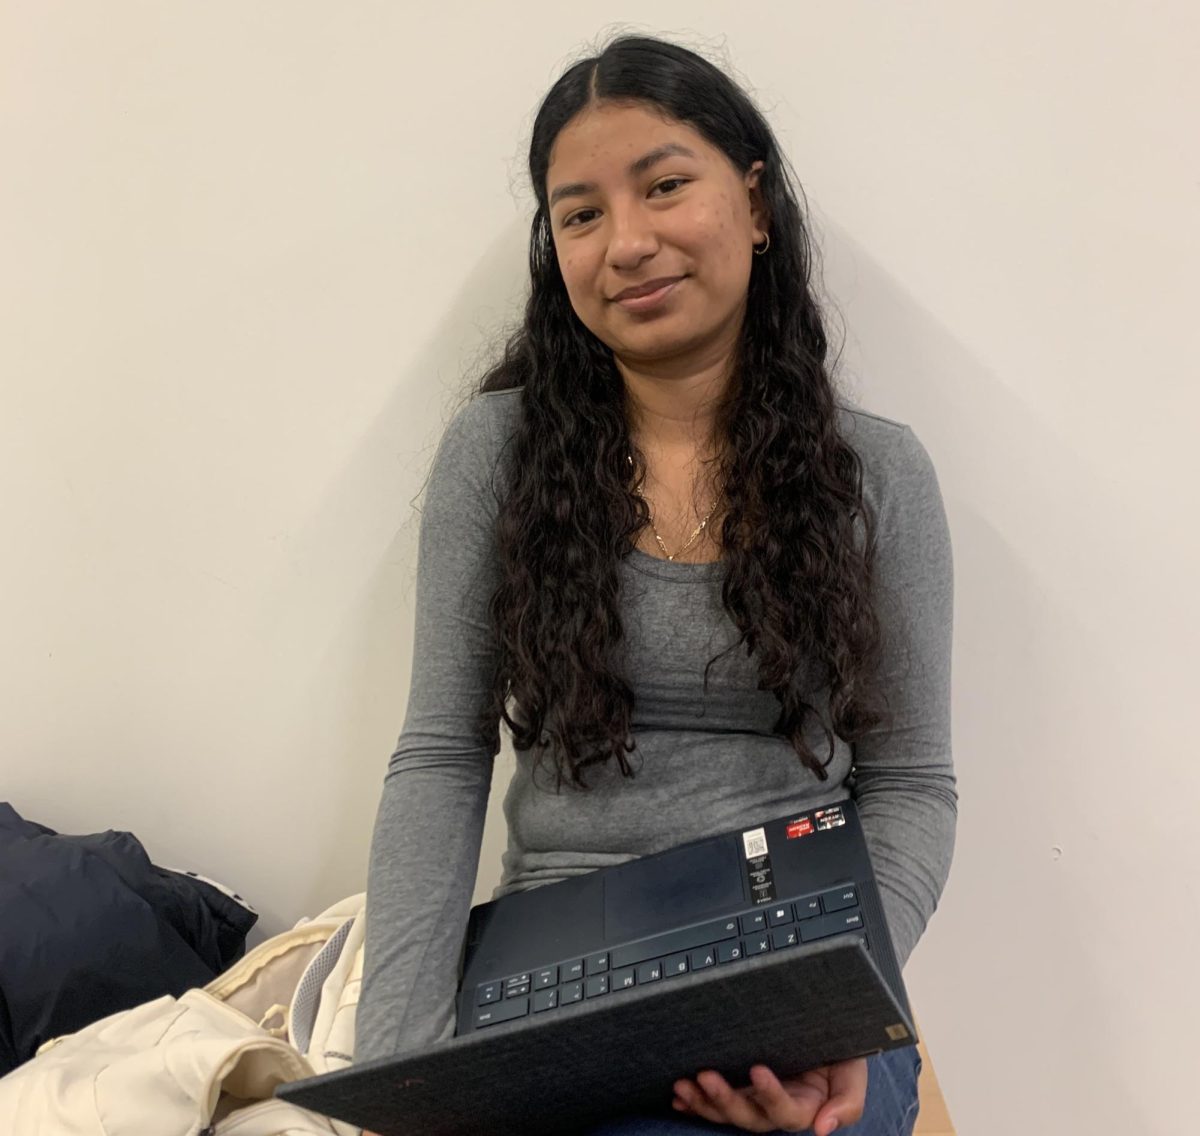 “I used to take the city bus, so for me, now my parents have to come drop me off and pick me up… I take bus 12 and they closed down the street, too, so the bus has to go around the whole block the other way.”
-Yaritza Gallardo Vazquez, 19, Child Development